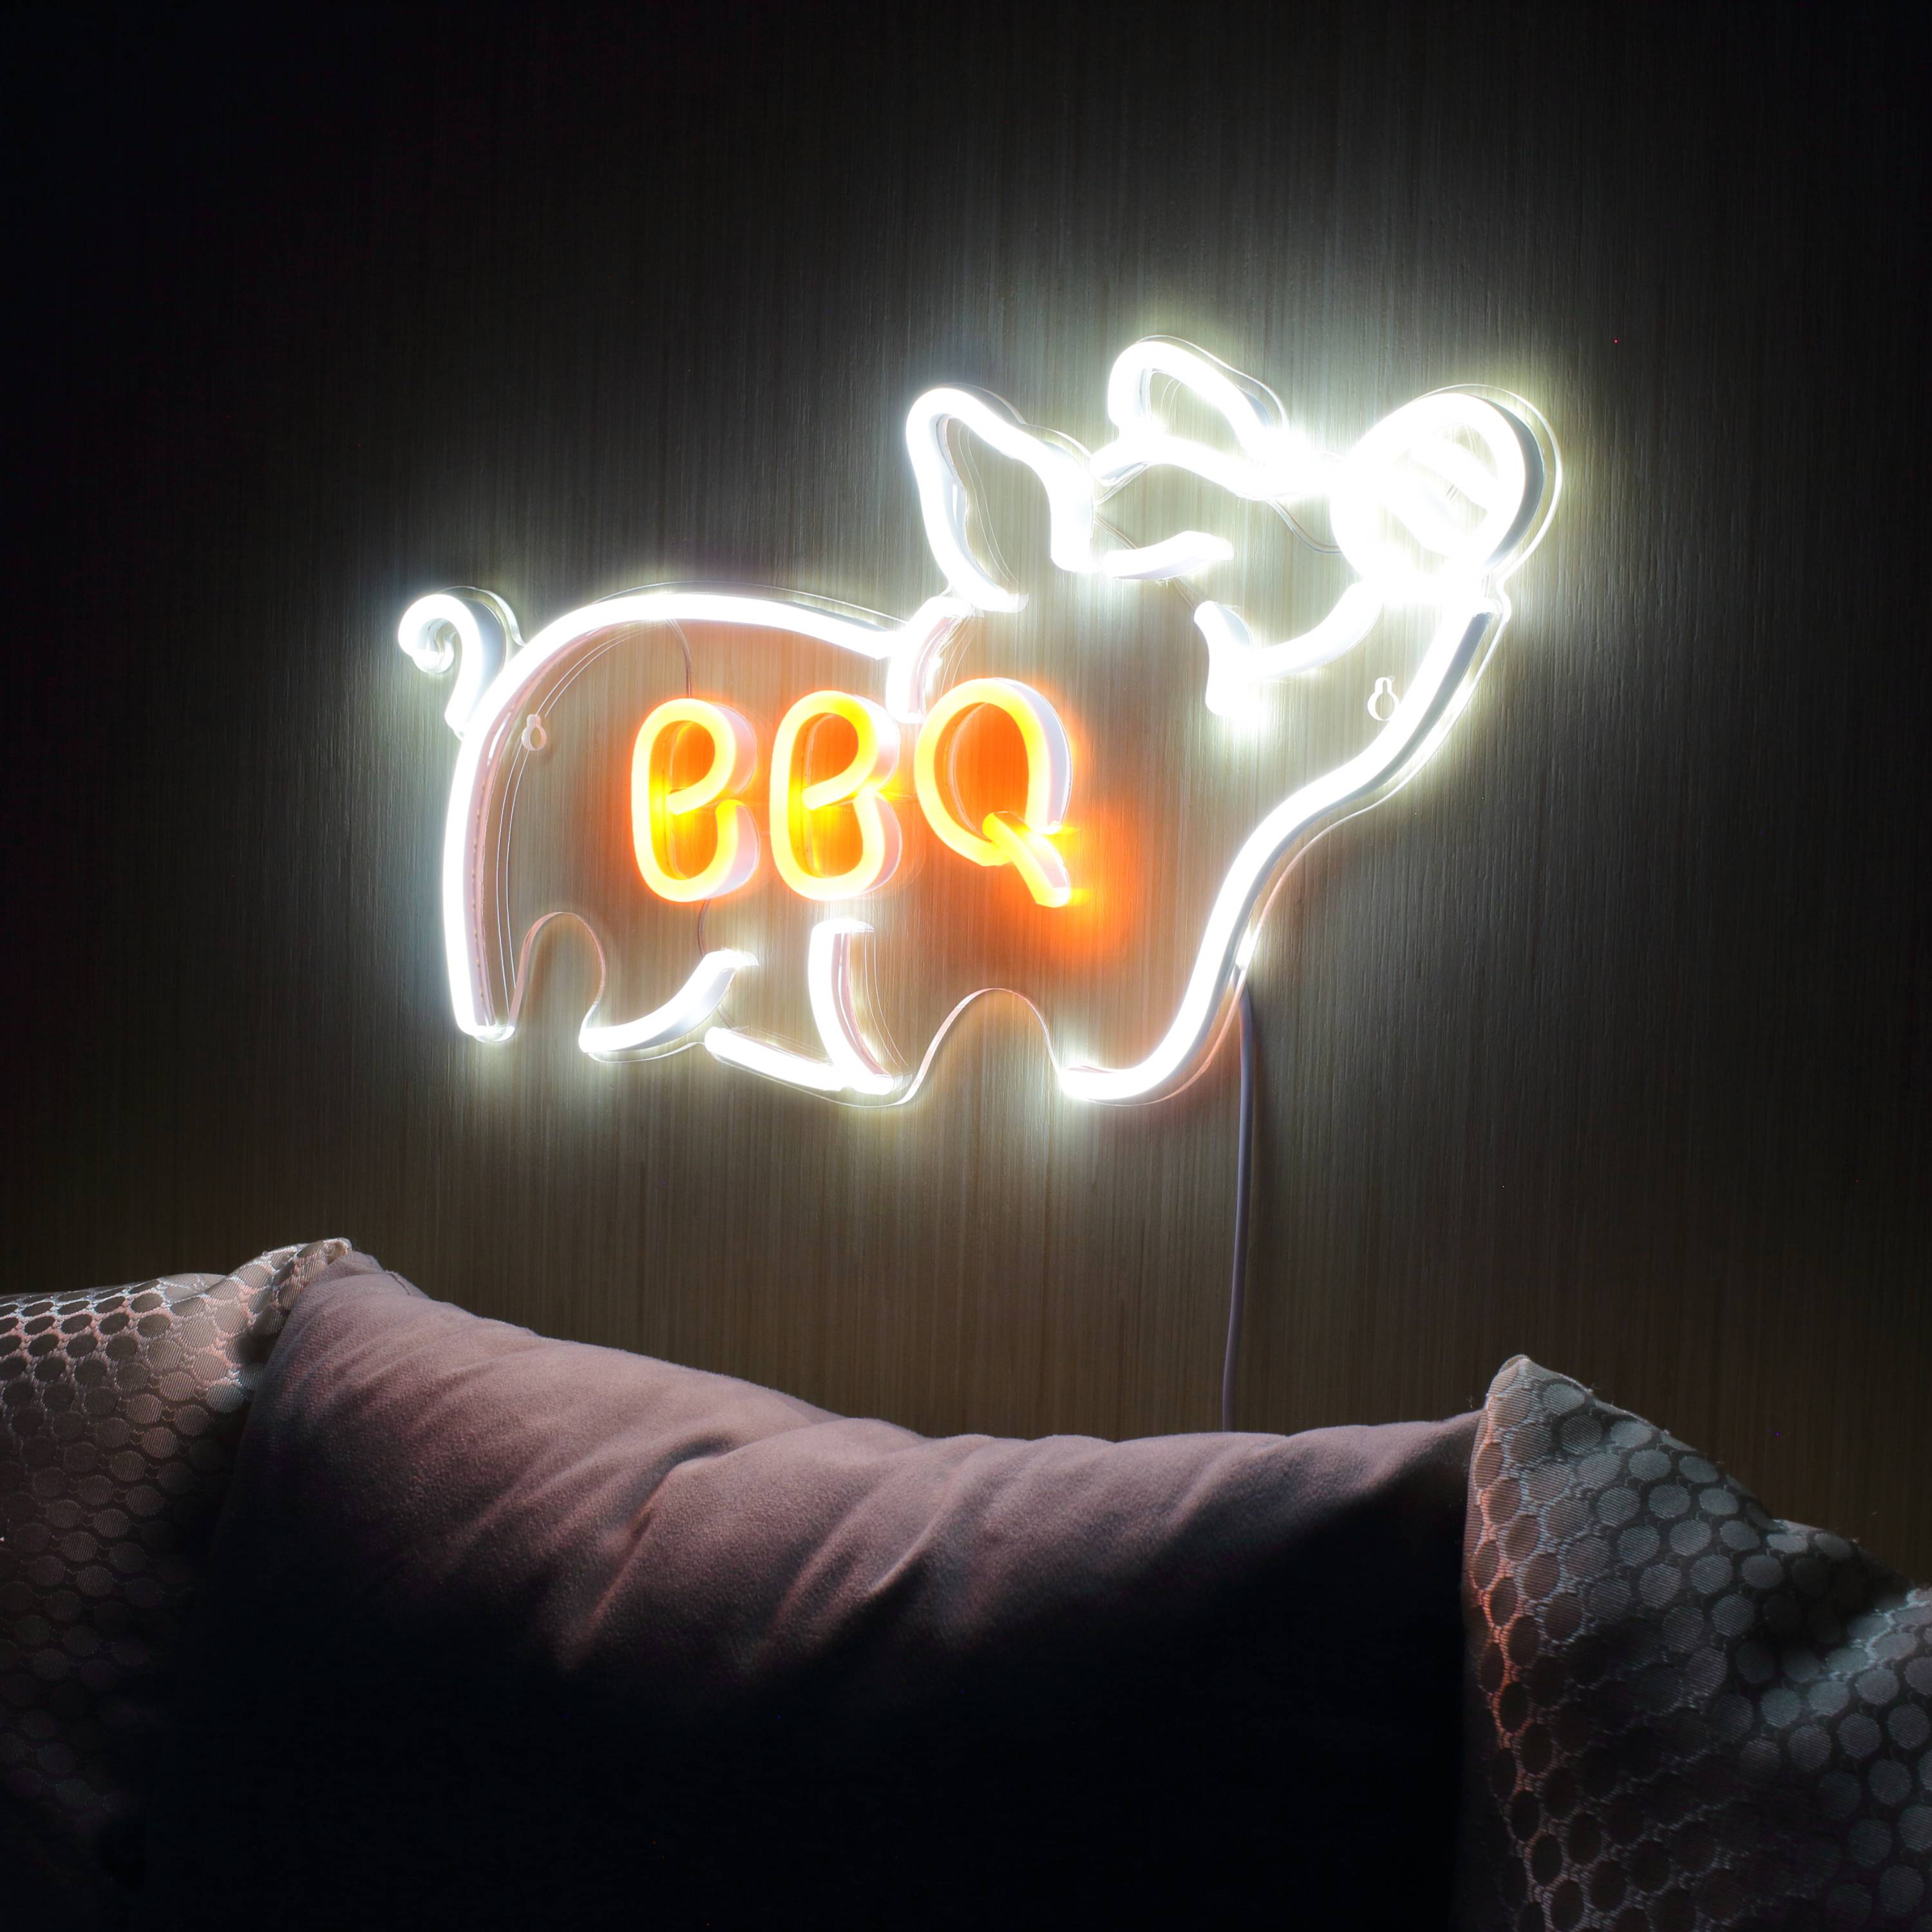 Budweiser with Pig Large Flex Neon LED Sign